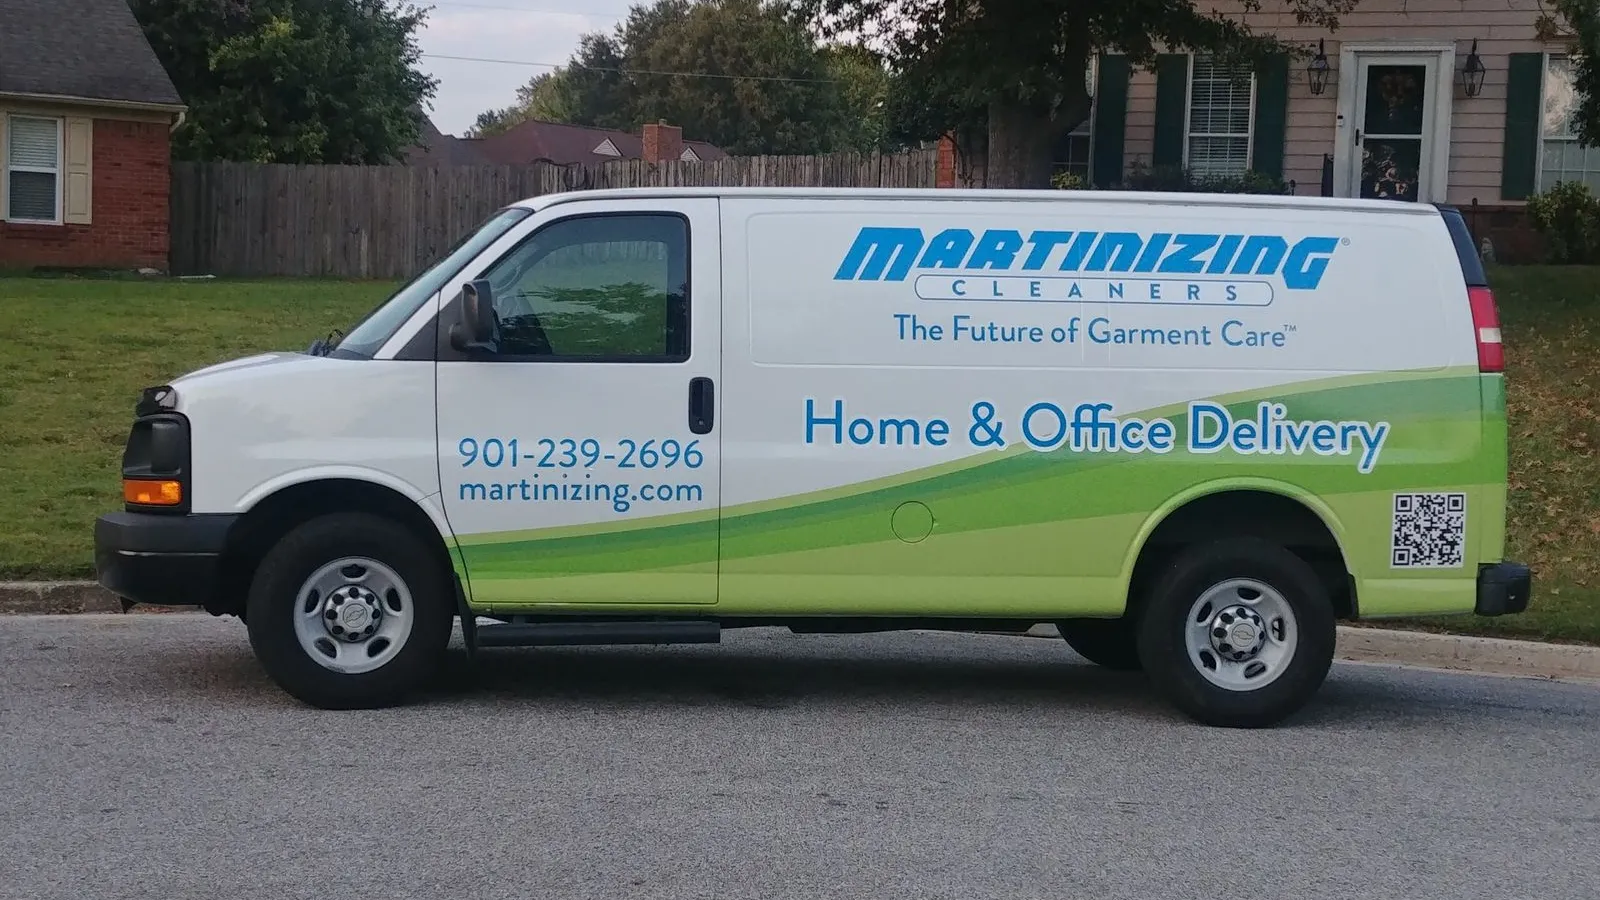 a white van with blue text